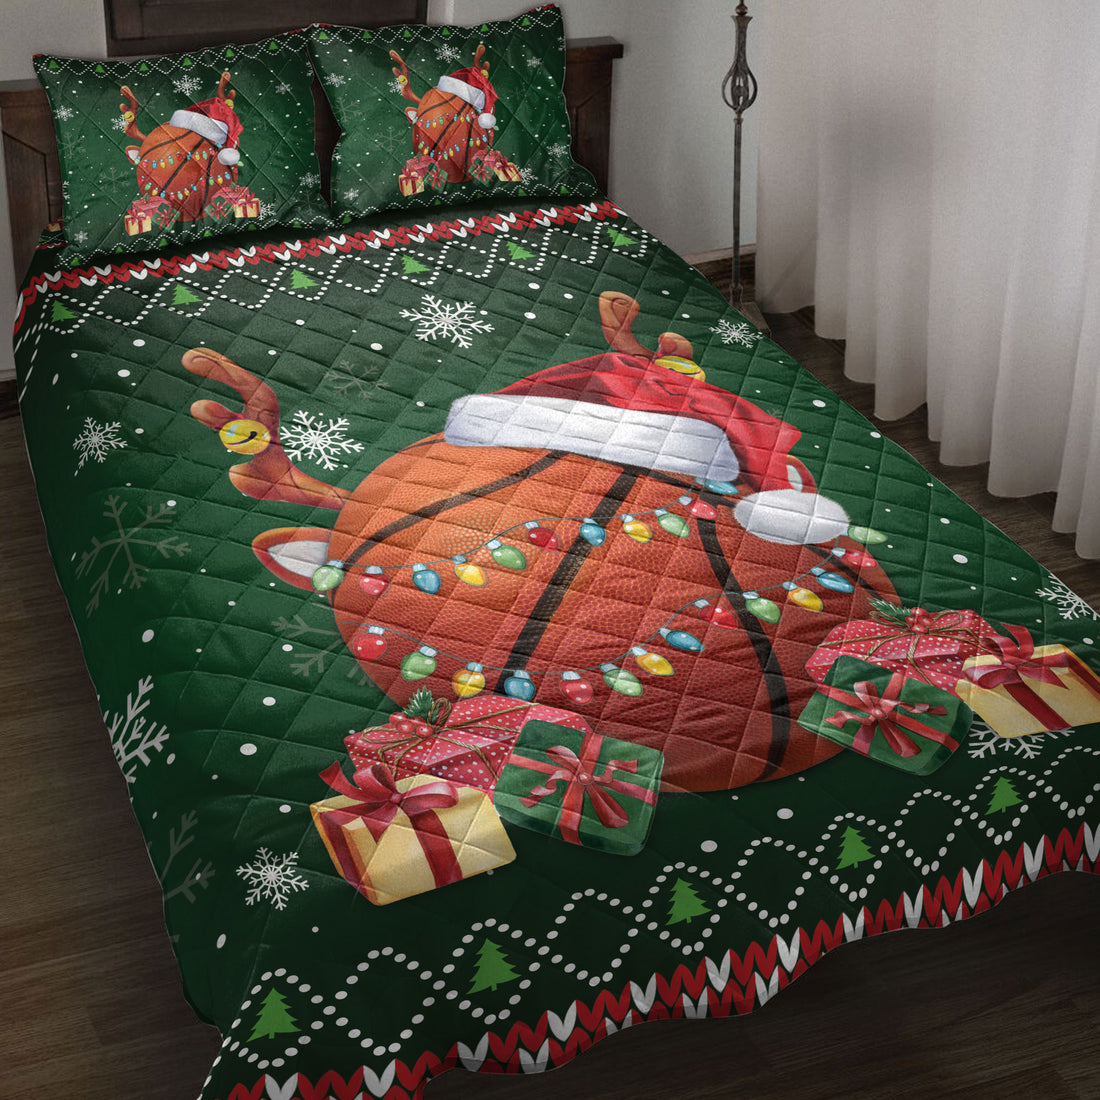 Ohaprints-Quilt-Bed-Set-Pillowcase-Basketball-Christmas-Hat-Snowflake-Reindeer-Horn-Gift-Box-Ugly-Blanket-Bedspread-Bedding-3770-Throw (55'' x 60'')